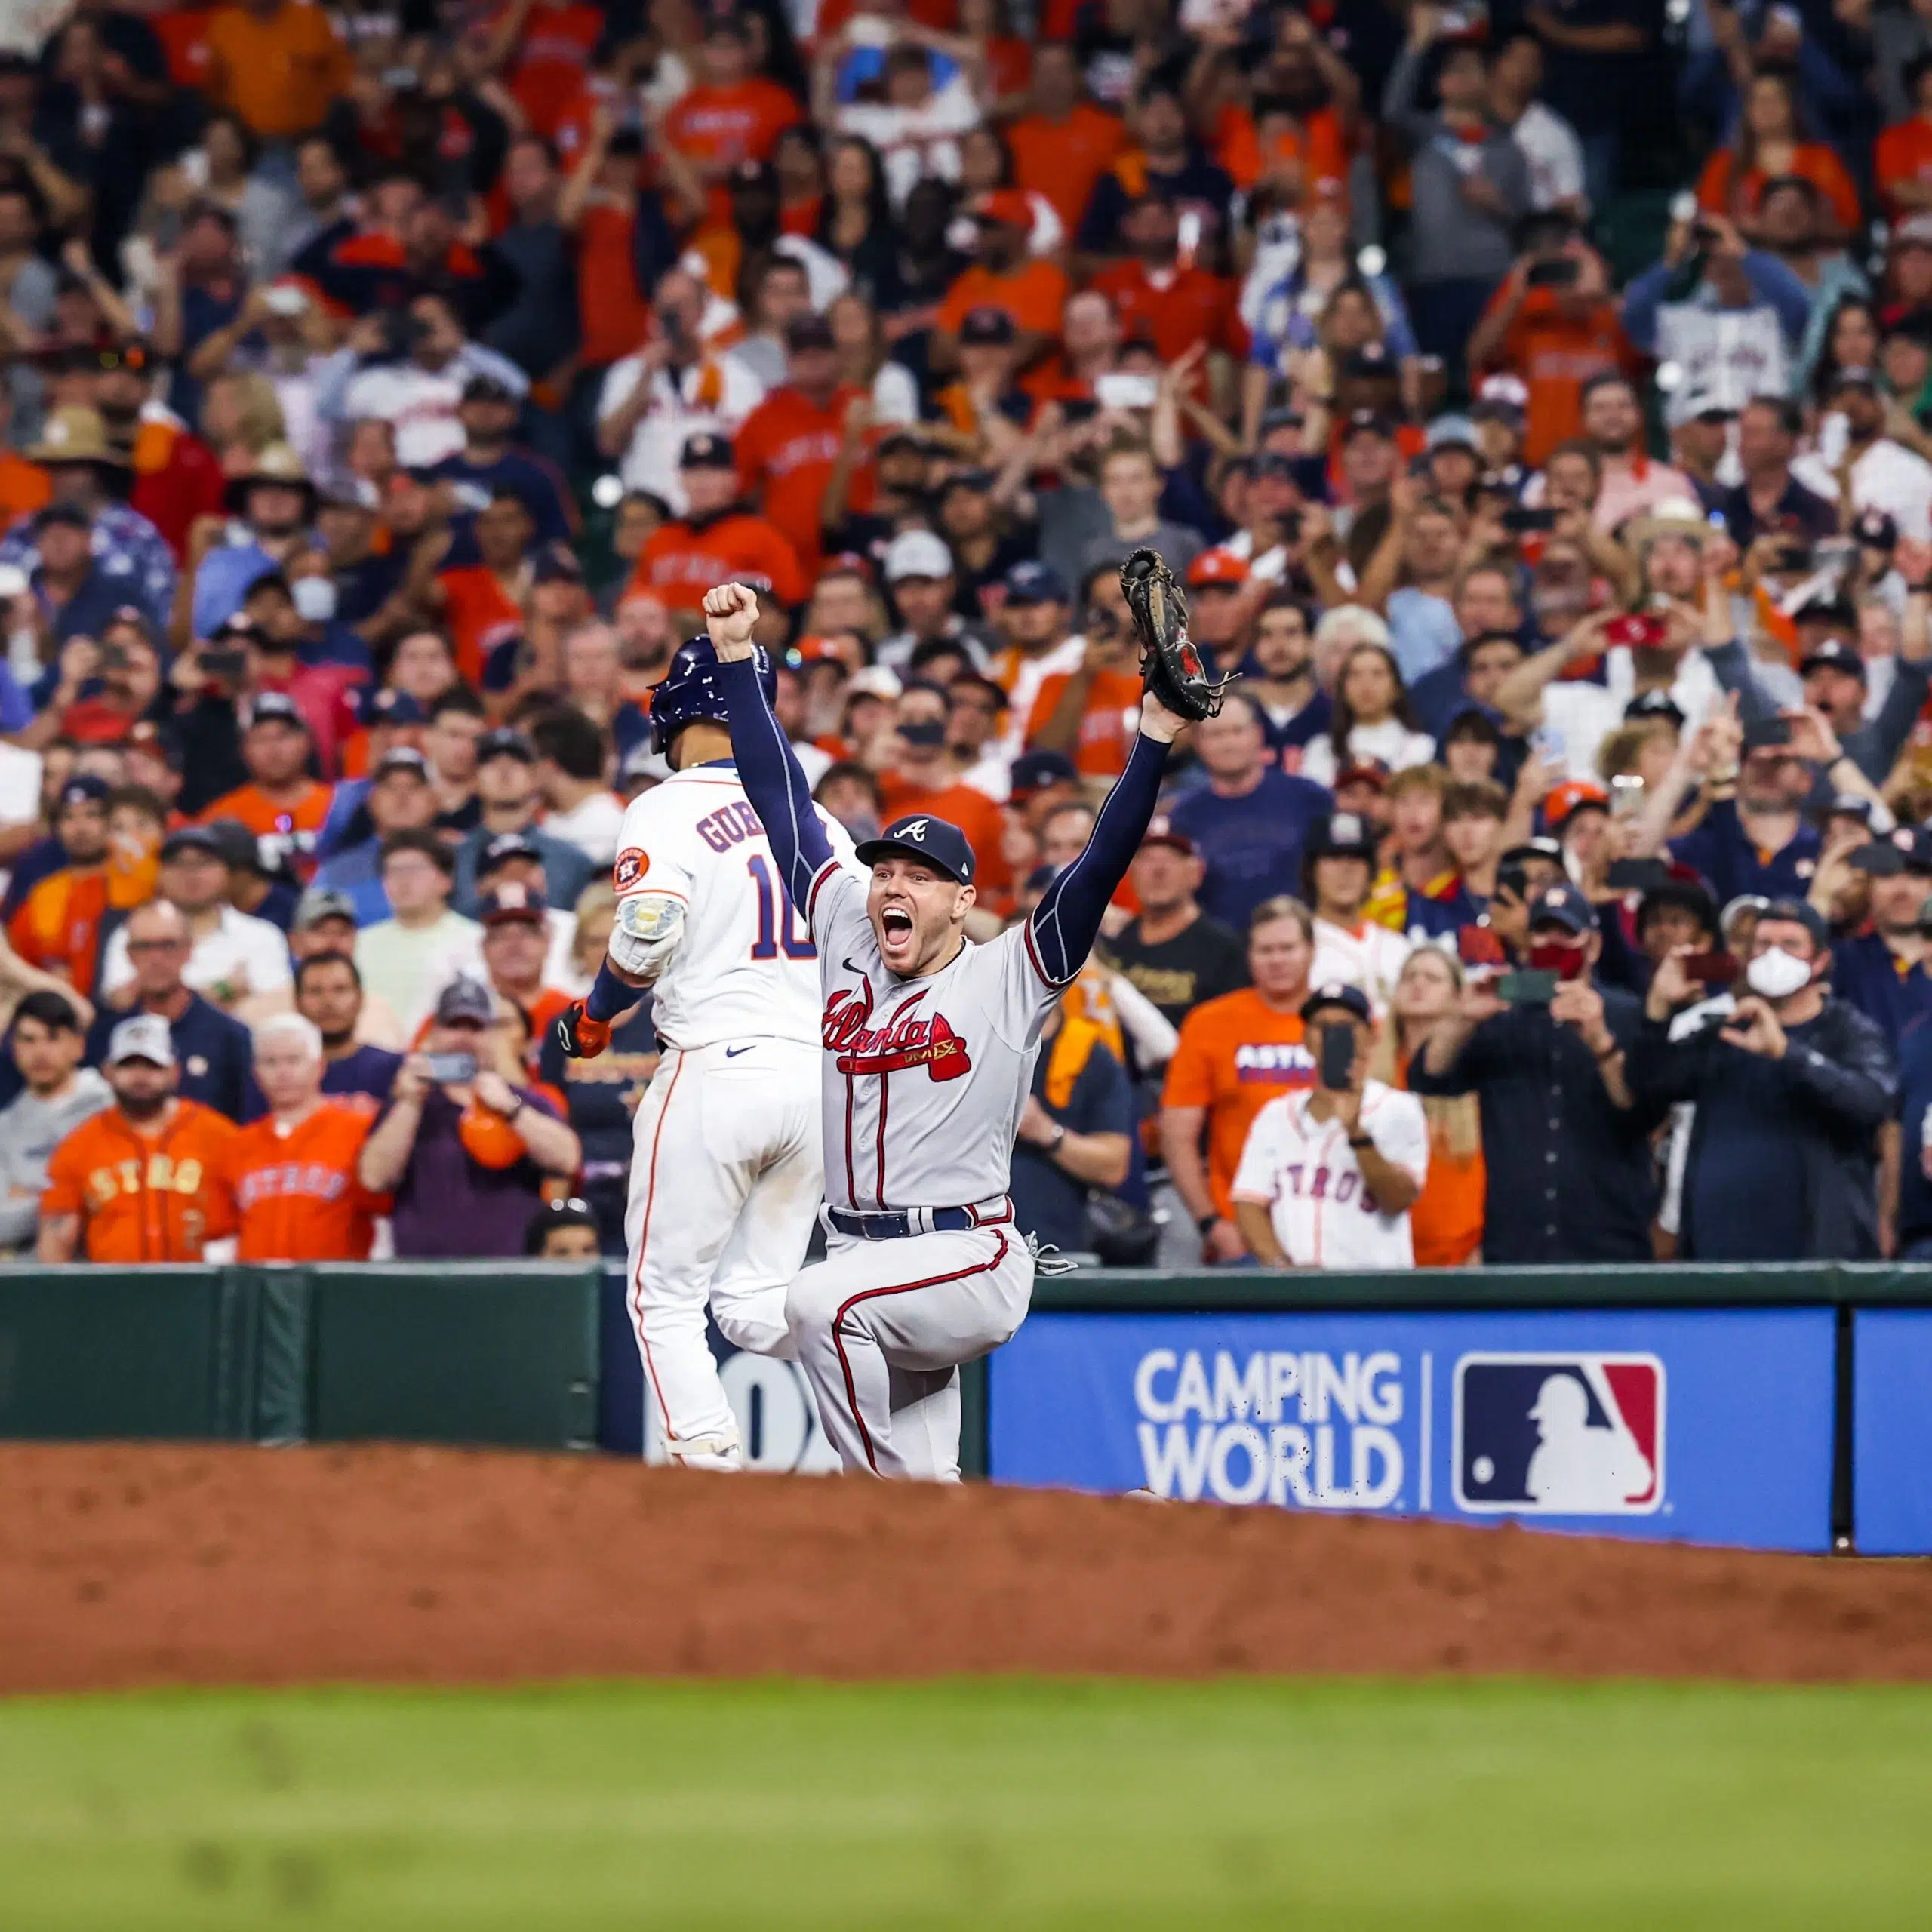 PHOTOS: Atlanta Braves Win First World Series Title in 26 Years